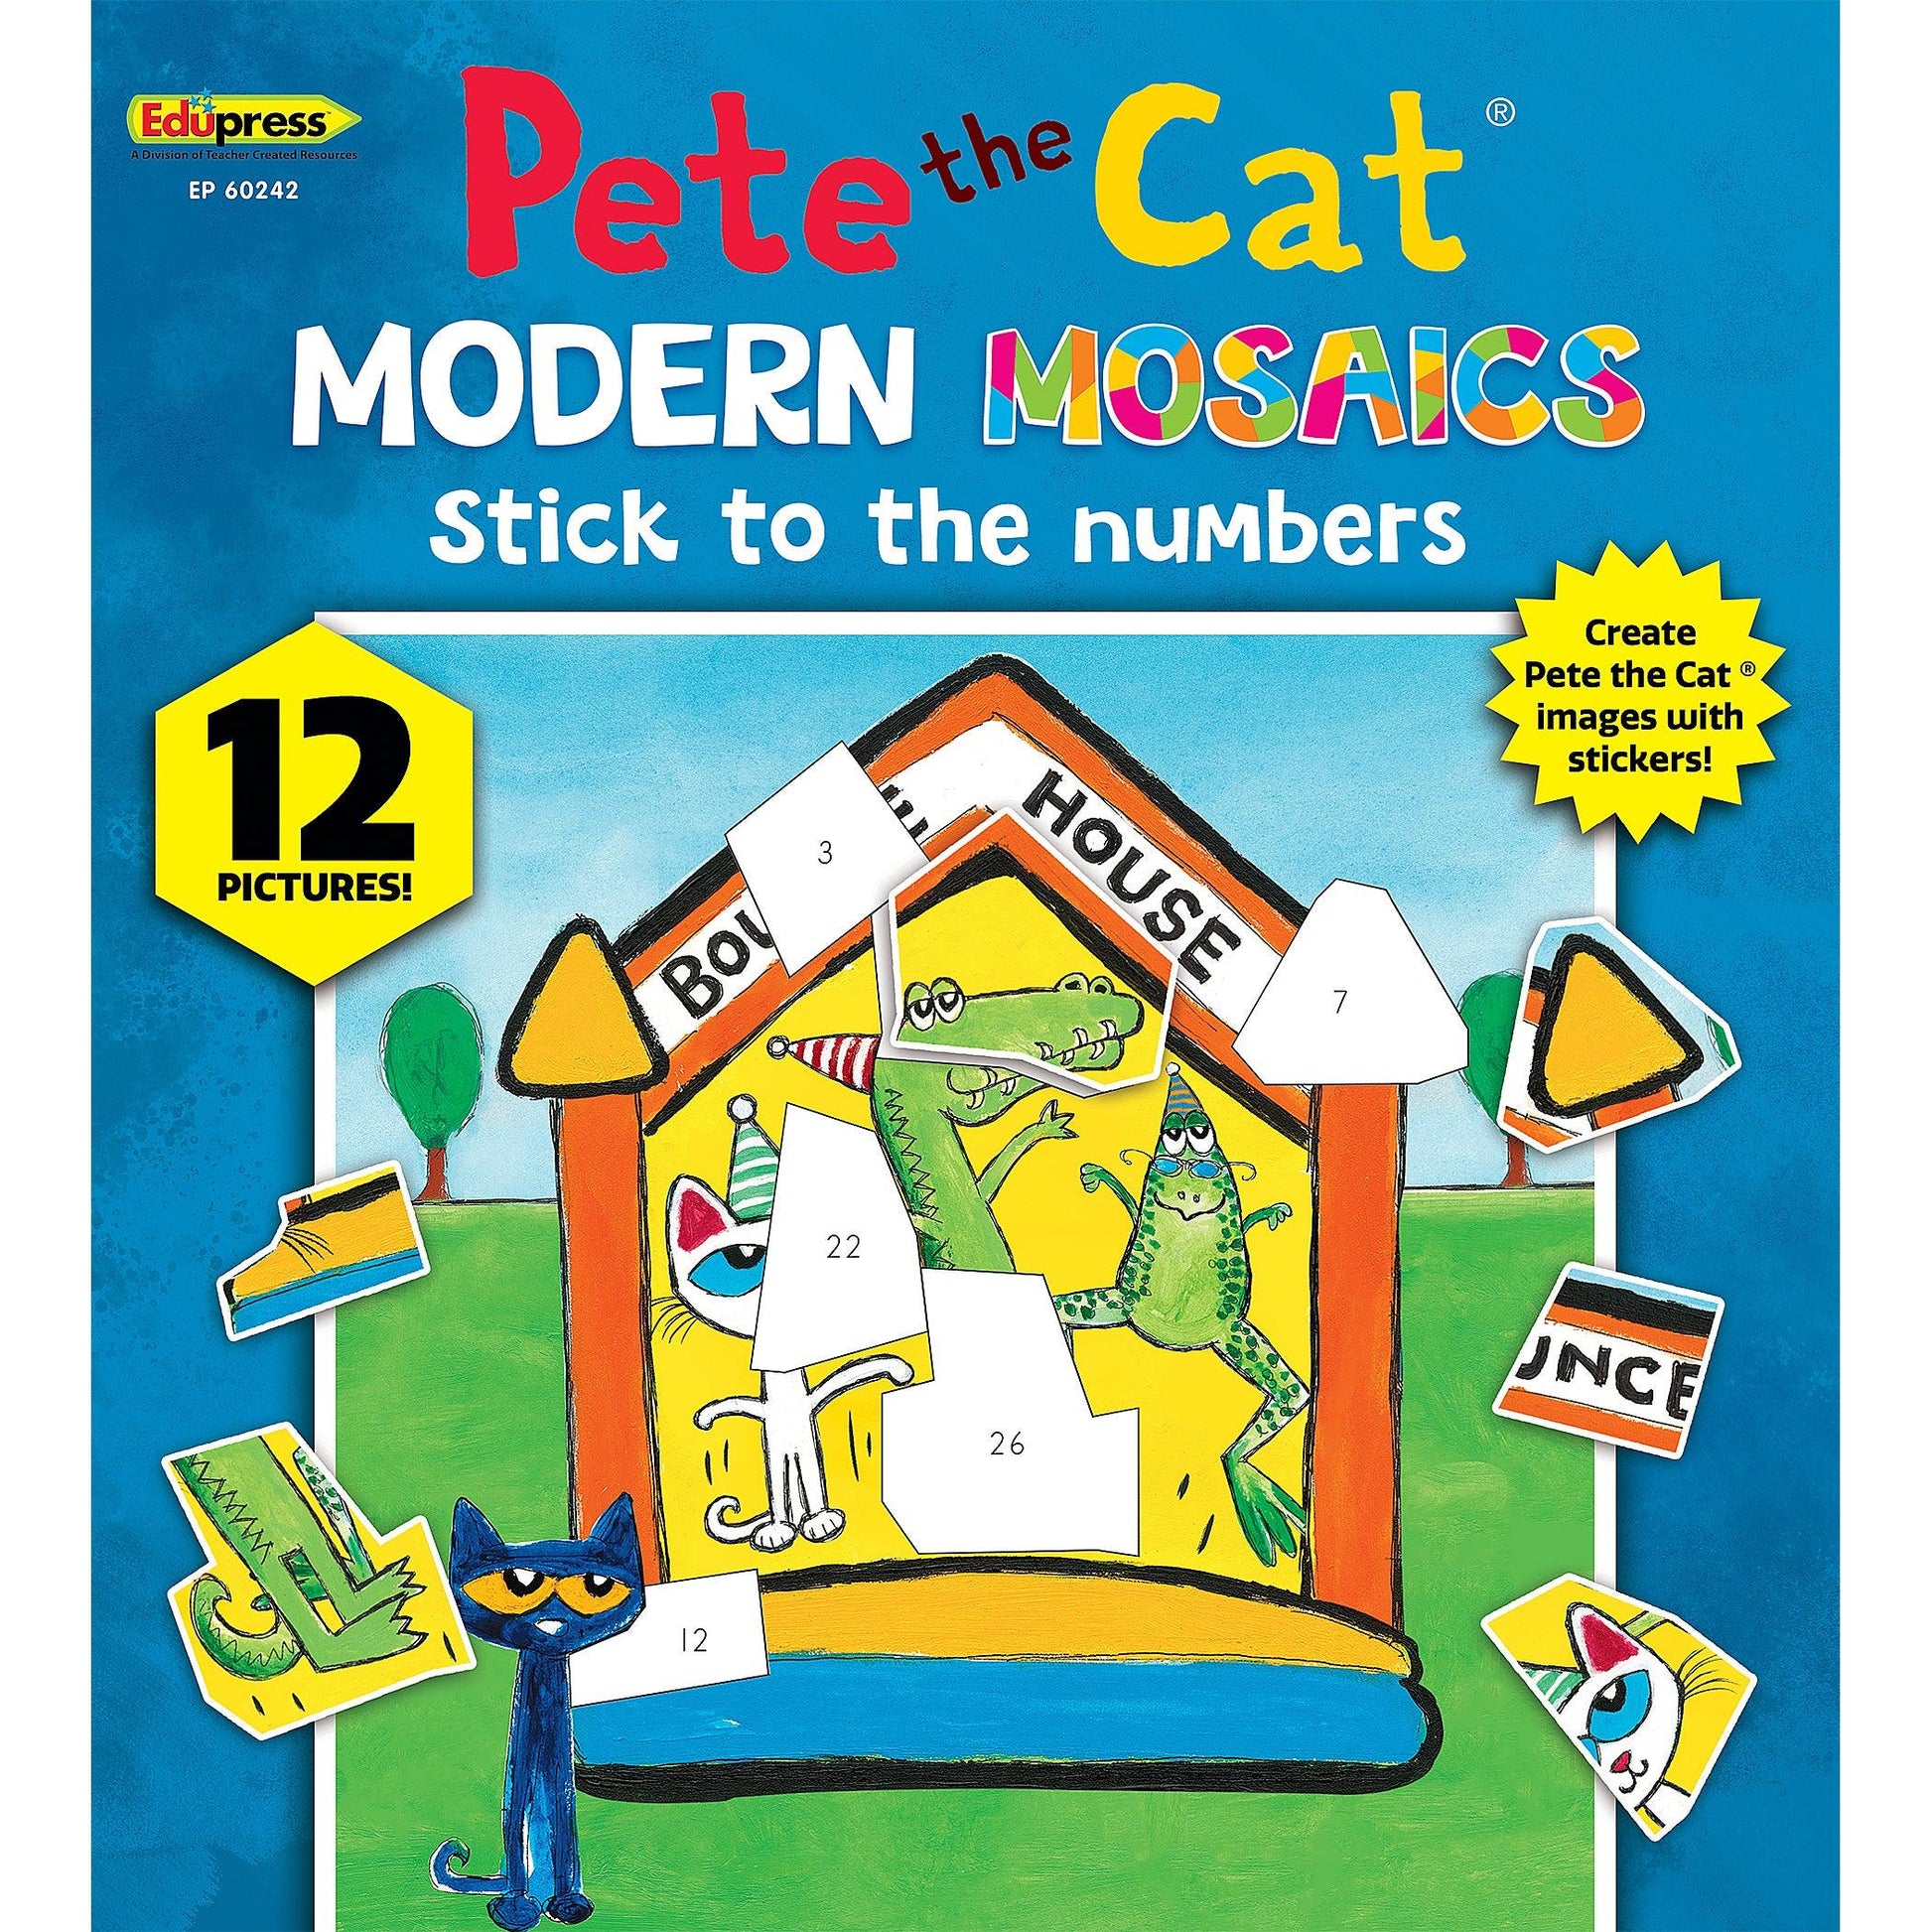 Pete The Cat Modern Mosaics Stick to the Numbers Activity Book, Pack of 2 - Loomini